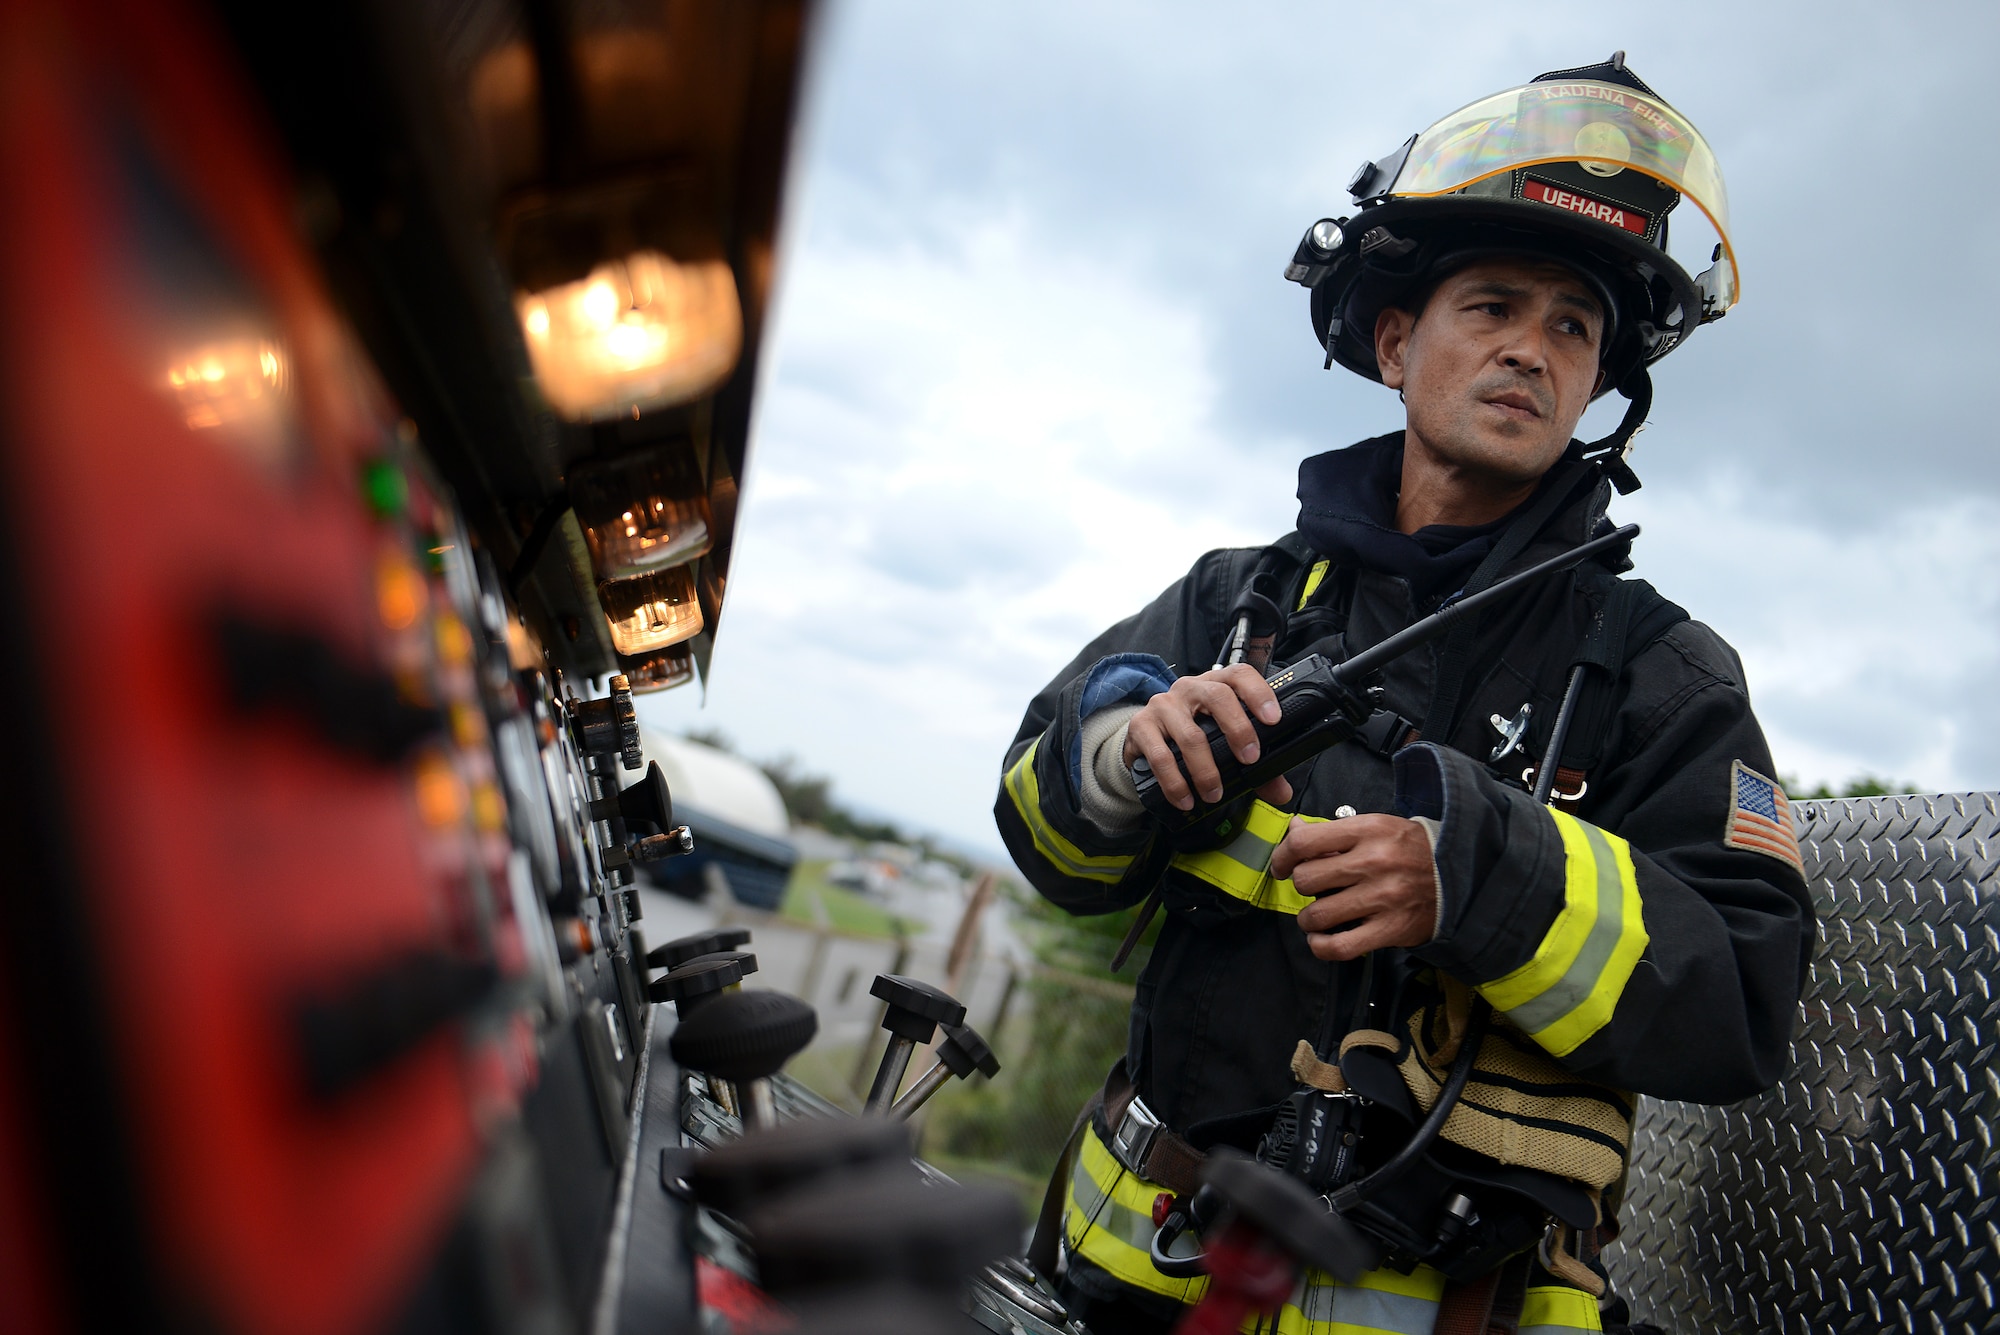 Keira Uehara listens to the radio atop a fire truck during a simulated hazardous materials vehicle crash as part of a mission focused exercise Dec. 2, 2014, on Kadena Air Base, Japan. The exercise tested Airmen on their ability to survive and operate in a multitude of stressful environments. Uhara is a 18th Civil Engineer Squadron firefighter. (U.S. Air Force photo/Senior Airman Maeson L. Elleman)